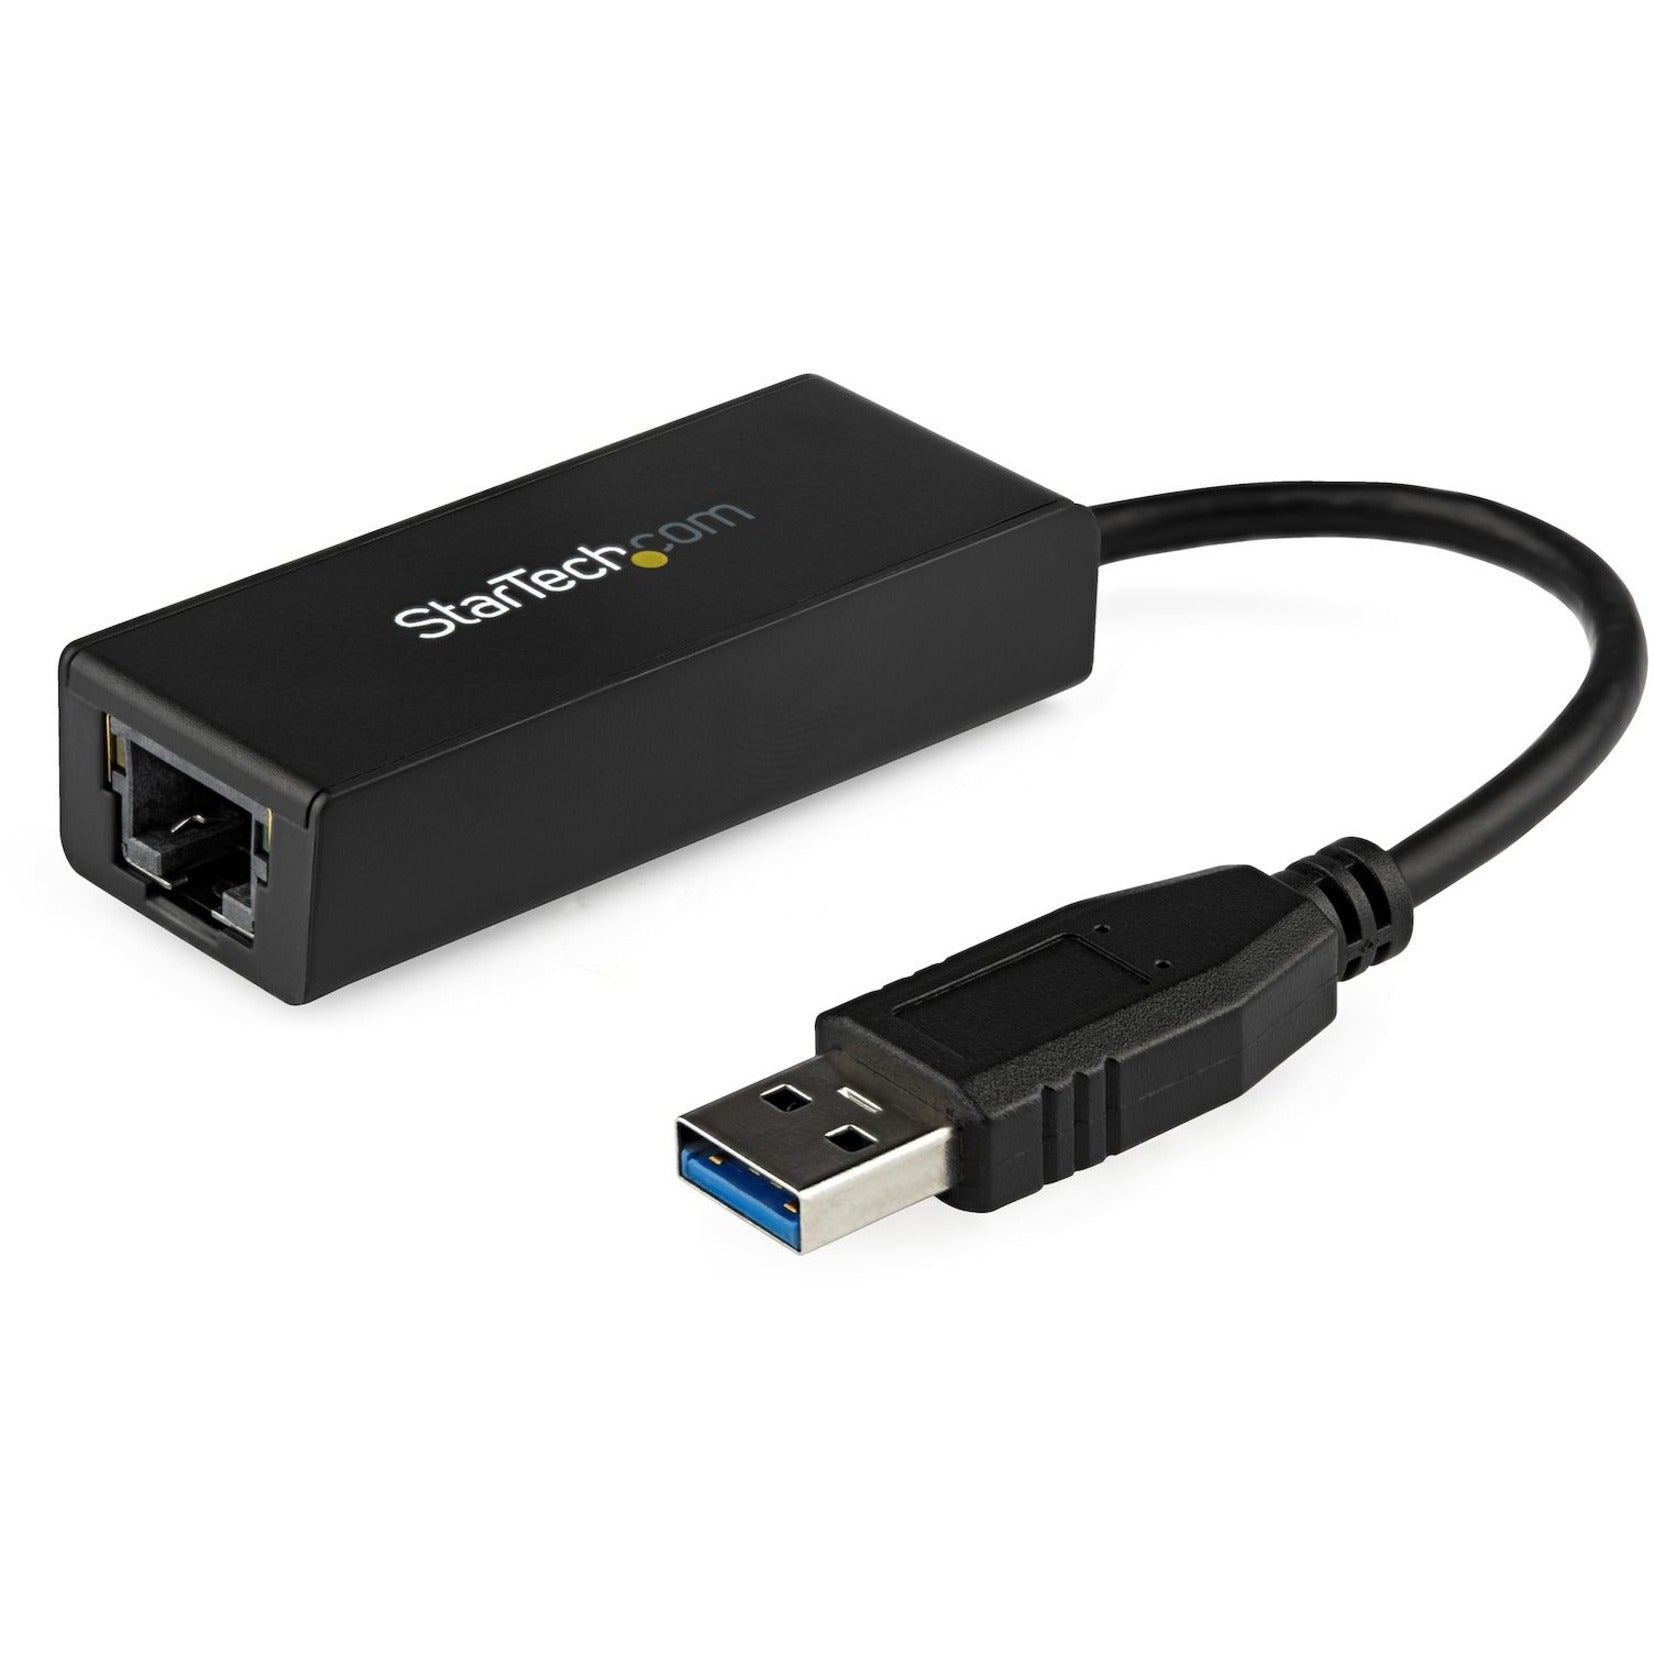 StarTech.com USB31000S USB 3.0 to Gigabit Ethernet NIC Network Adapter, High-Speed Internet Connection for PC